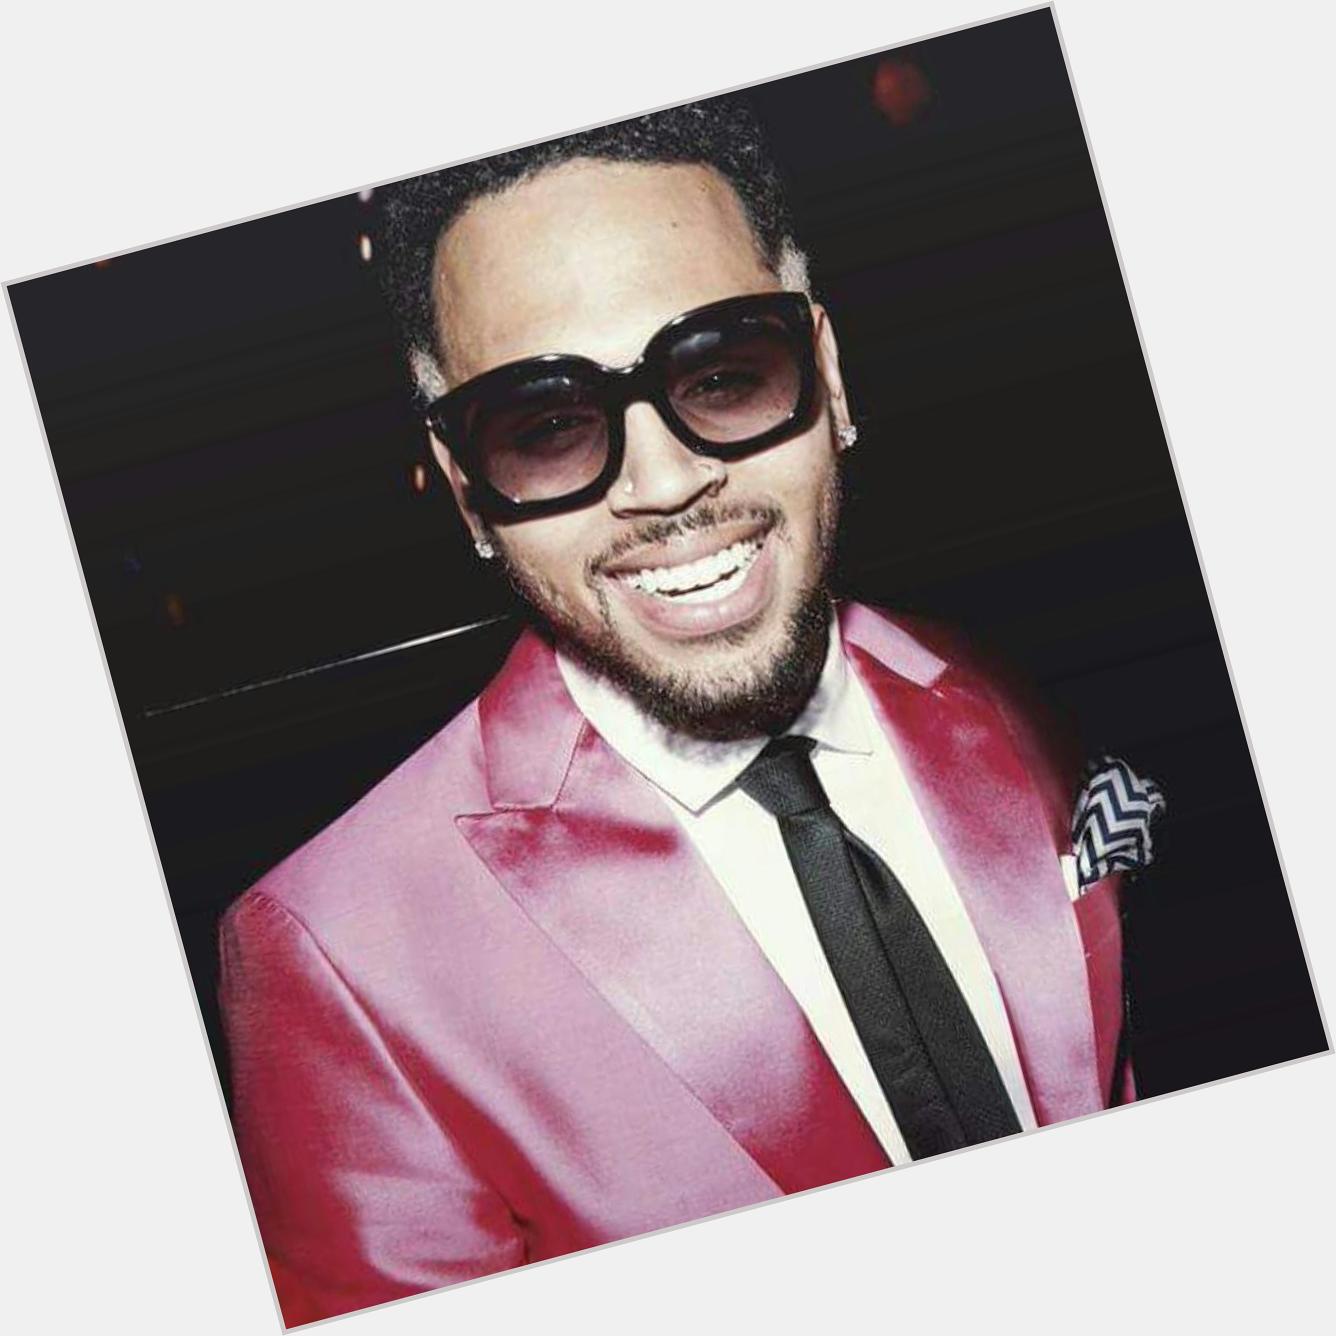 HAPPY BIRTHDAY to my IDOL/INSPIRATION CHRIS BROWN I love this guy so much lol 